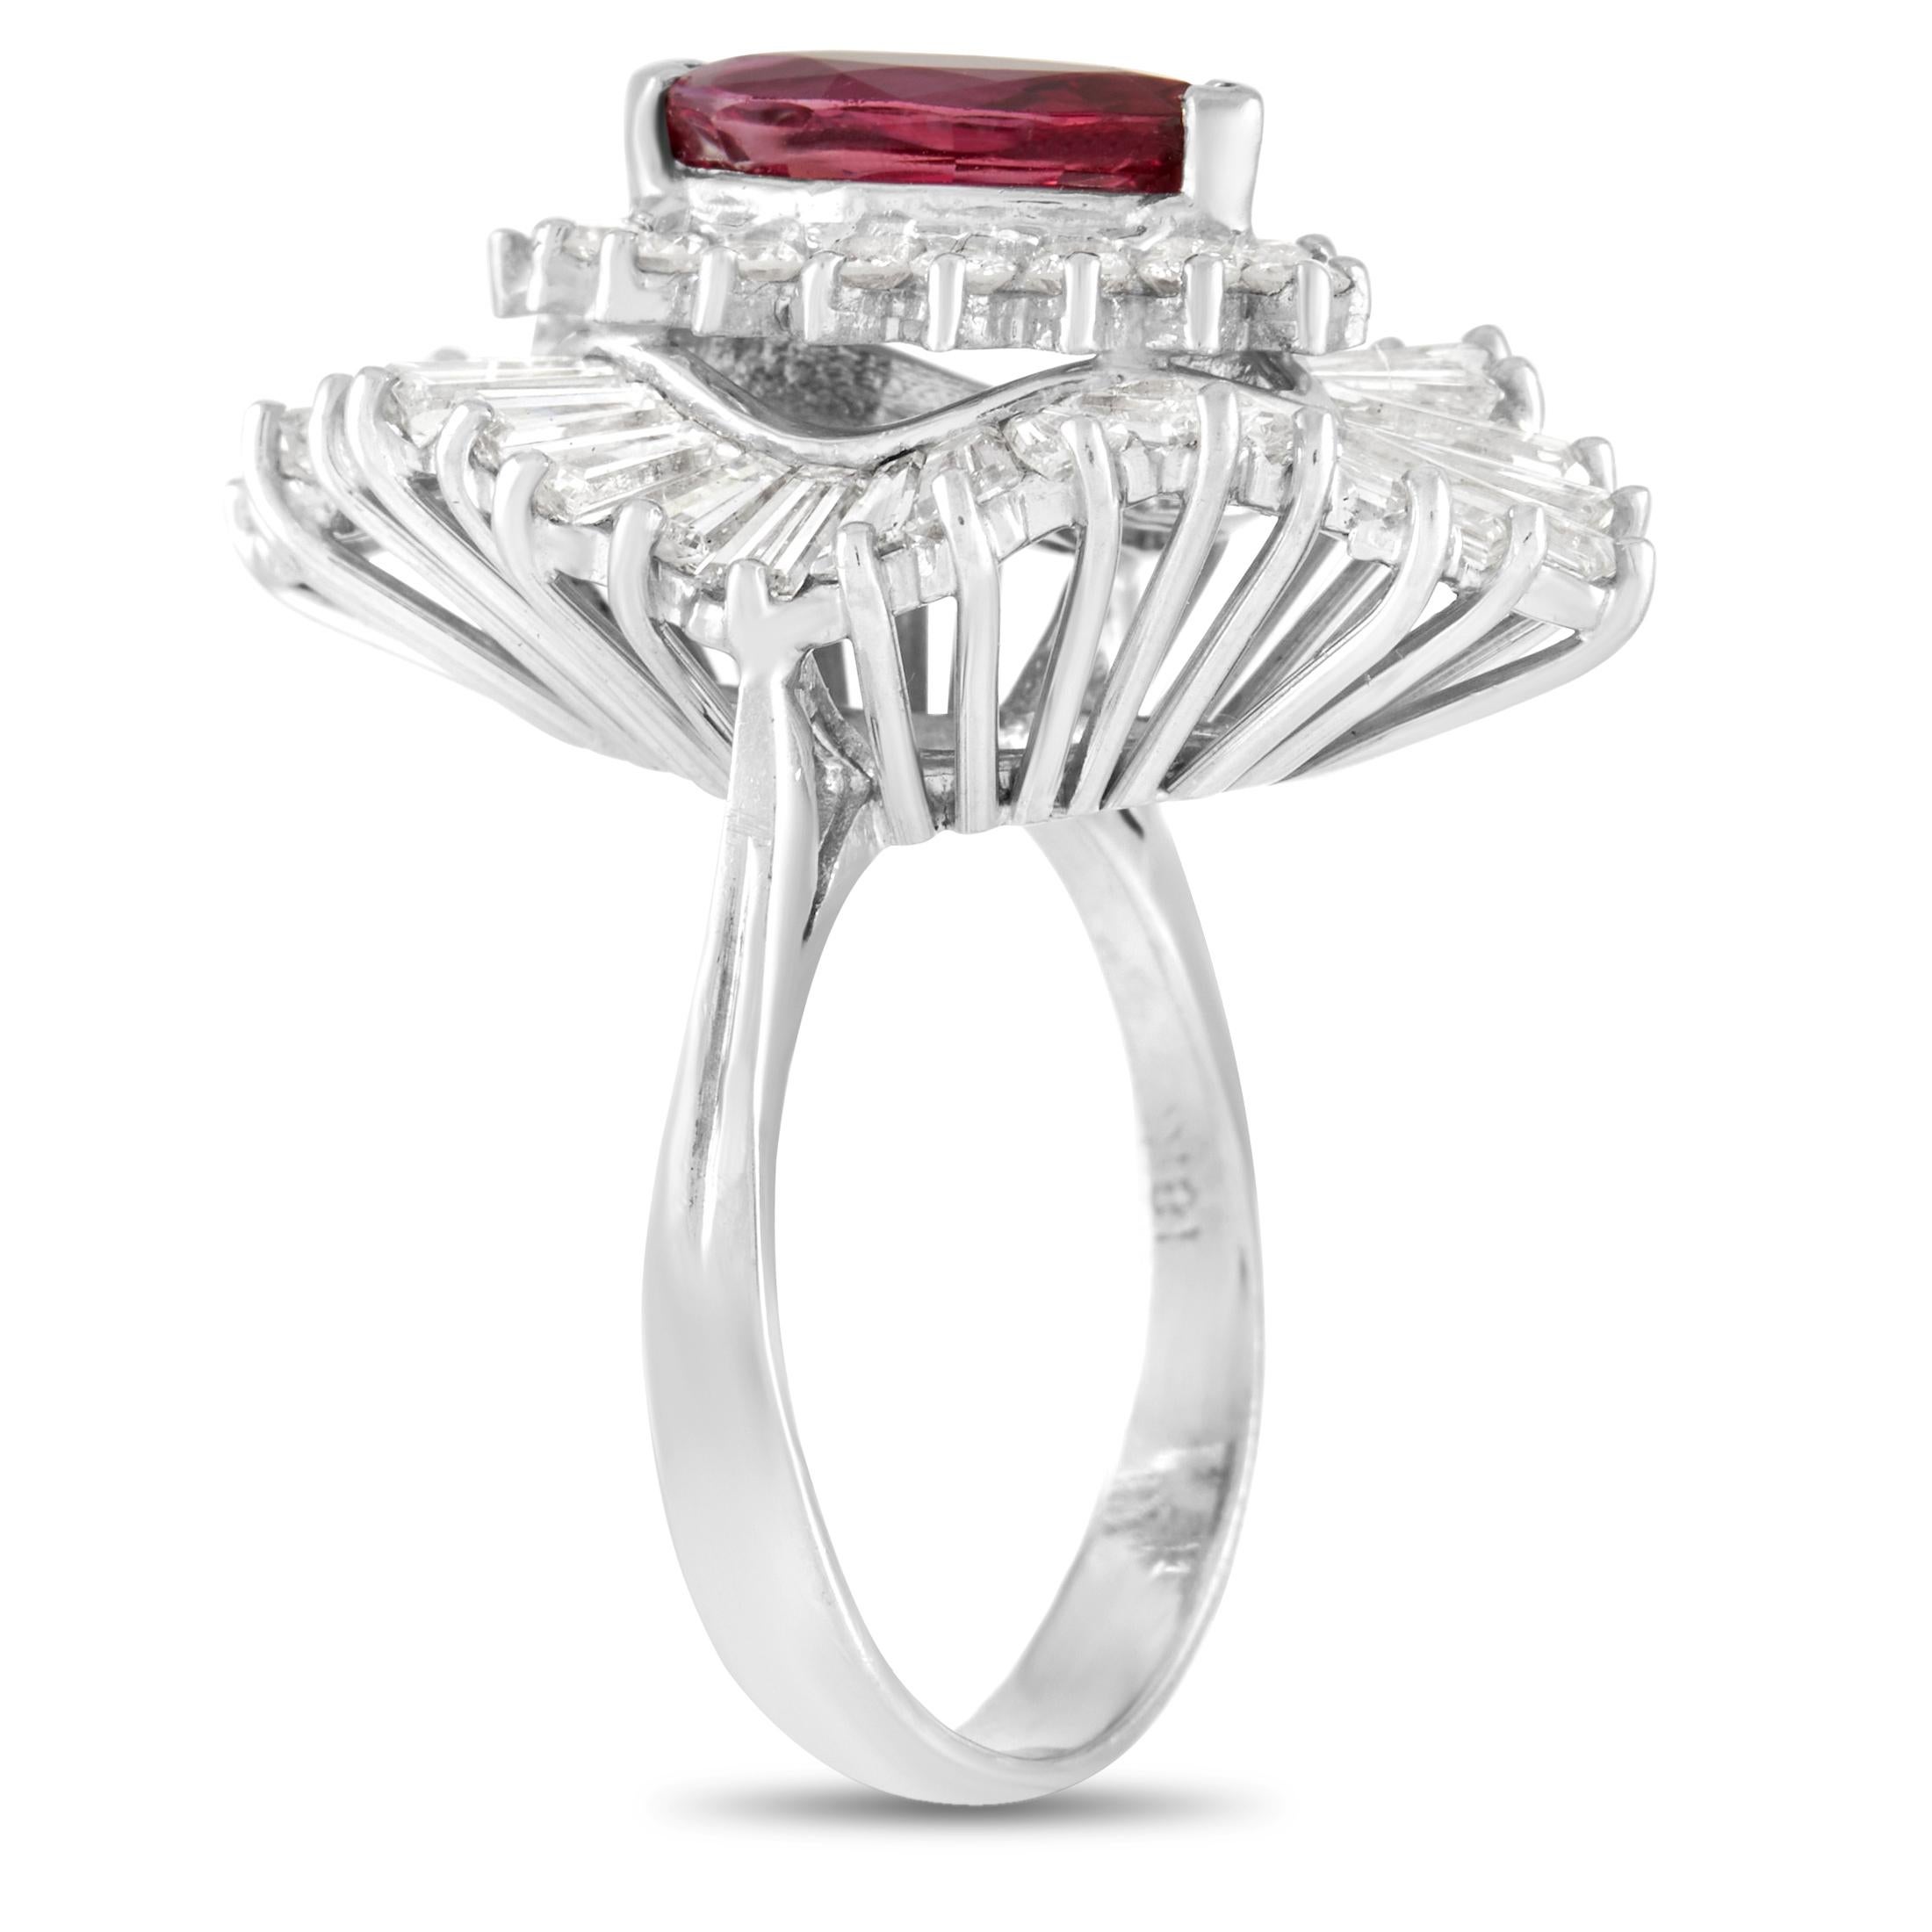 This gorgeous LB Exclusive 18K White Gold 5.50 ct Diamond 1.70 ct Ruby Ring was made with 18K white gold and set with a total of 5.50 carats of baguette cut and round cut diamonds forming a halo around the 1.70 carat oval cut ruby center stone. The